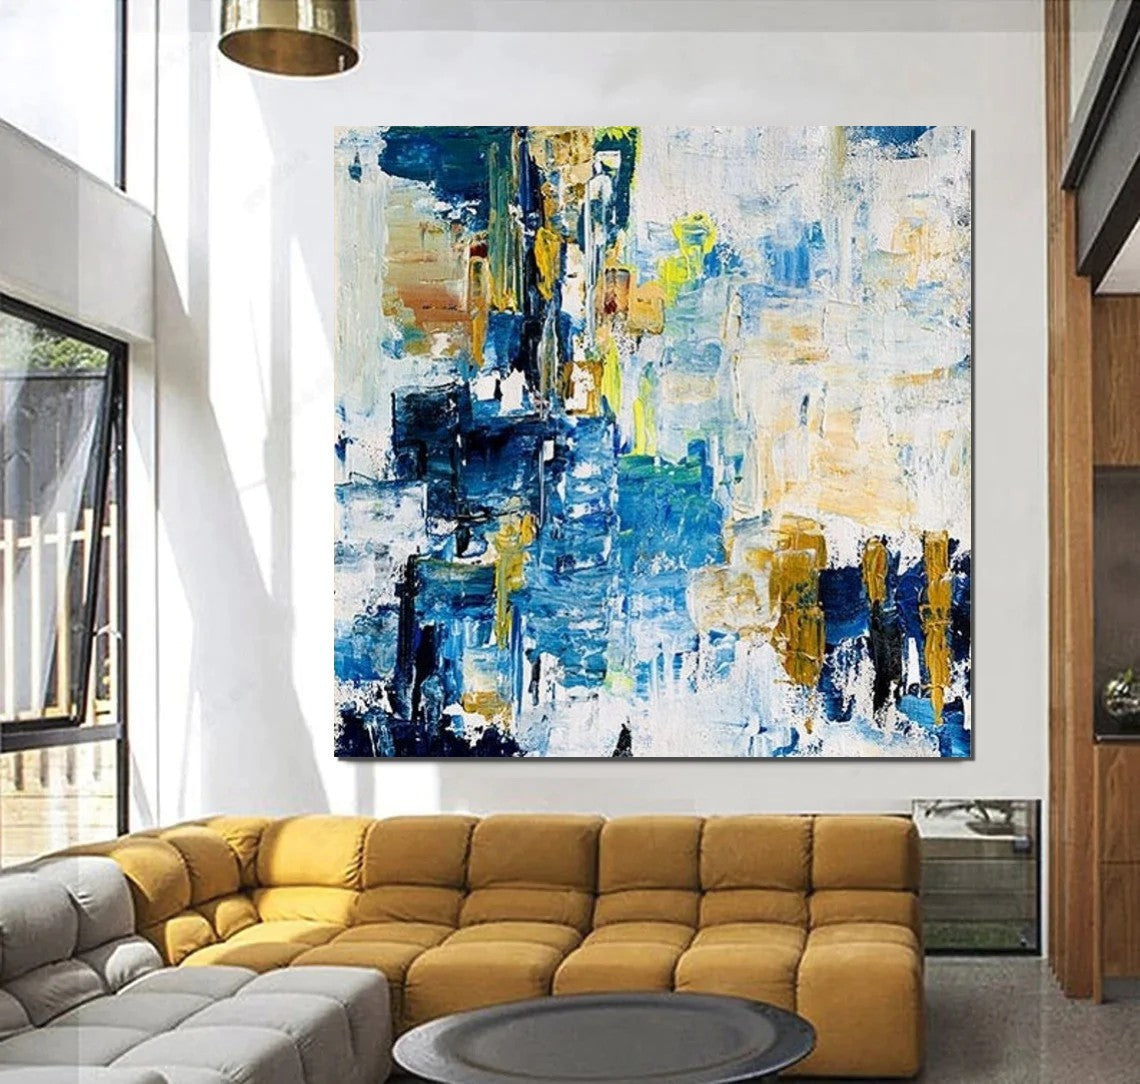 Acrylic Paintings for Bedroom, Large Paintings for Sale, Blue Abstract Acrylic Paintings, Living Room Wall Painting, Contemporary Modern Art, Simple Canvas Painting-Art Painting Canvas